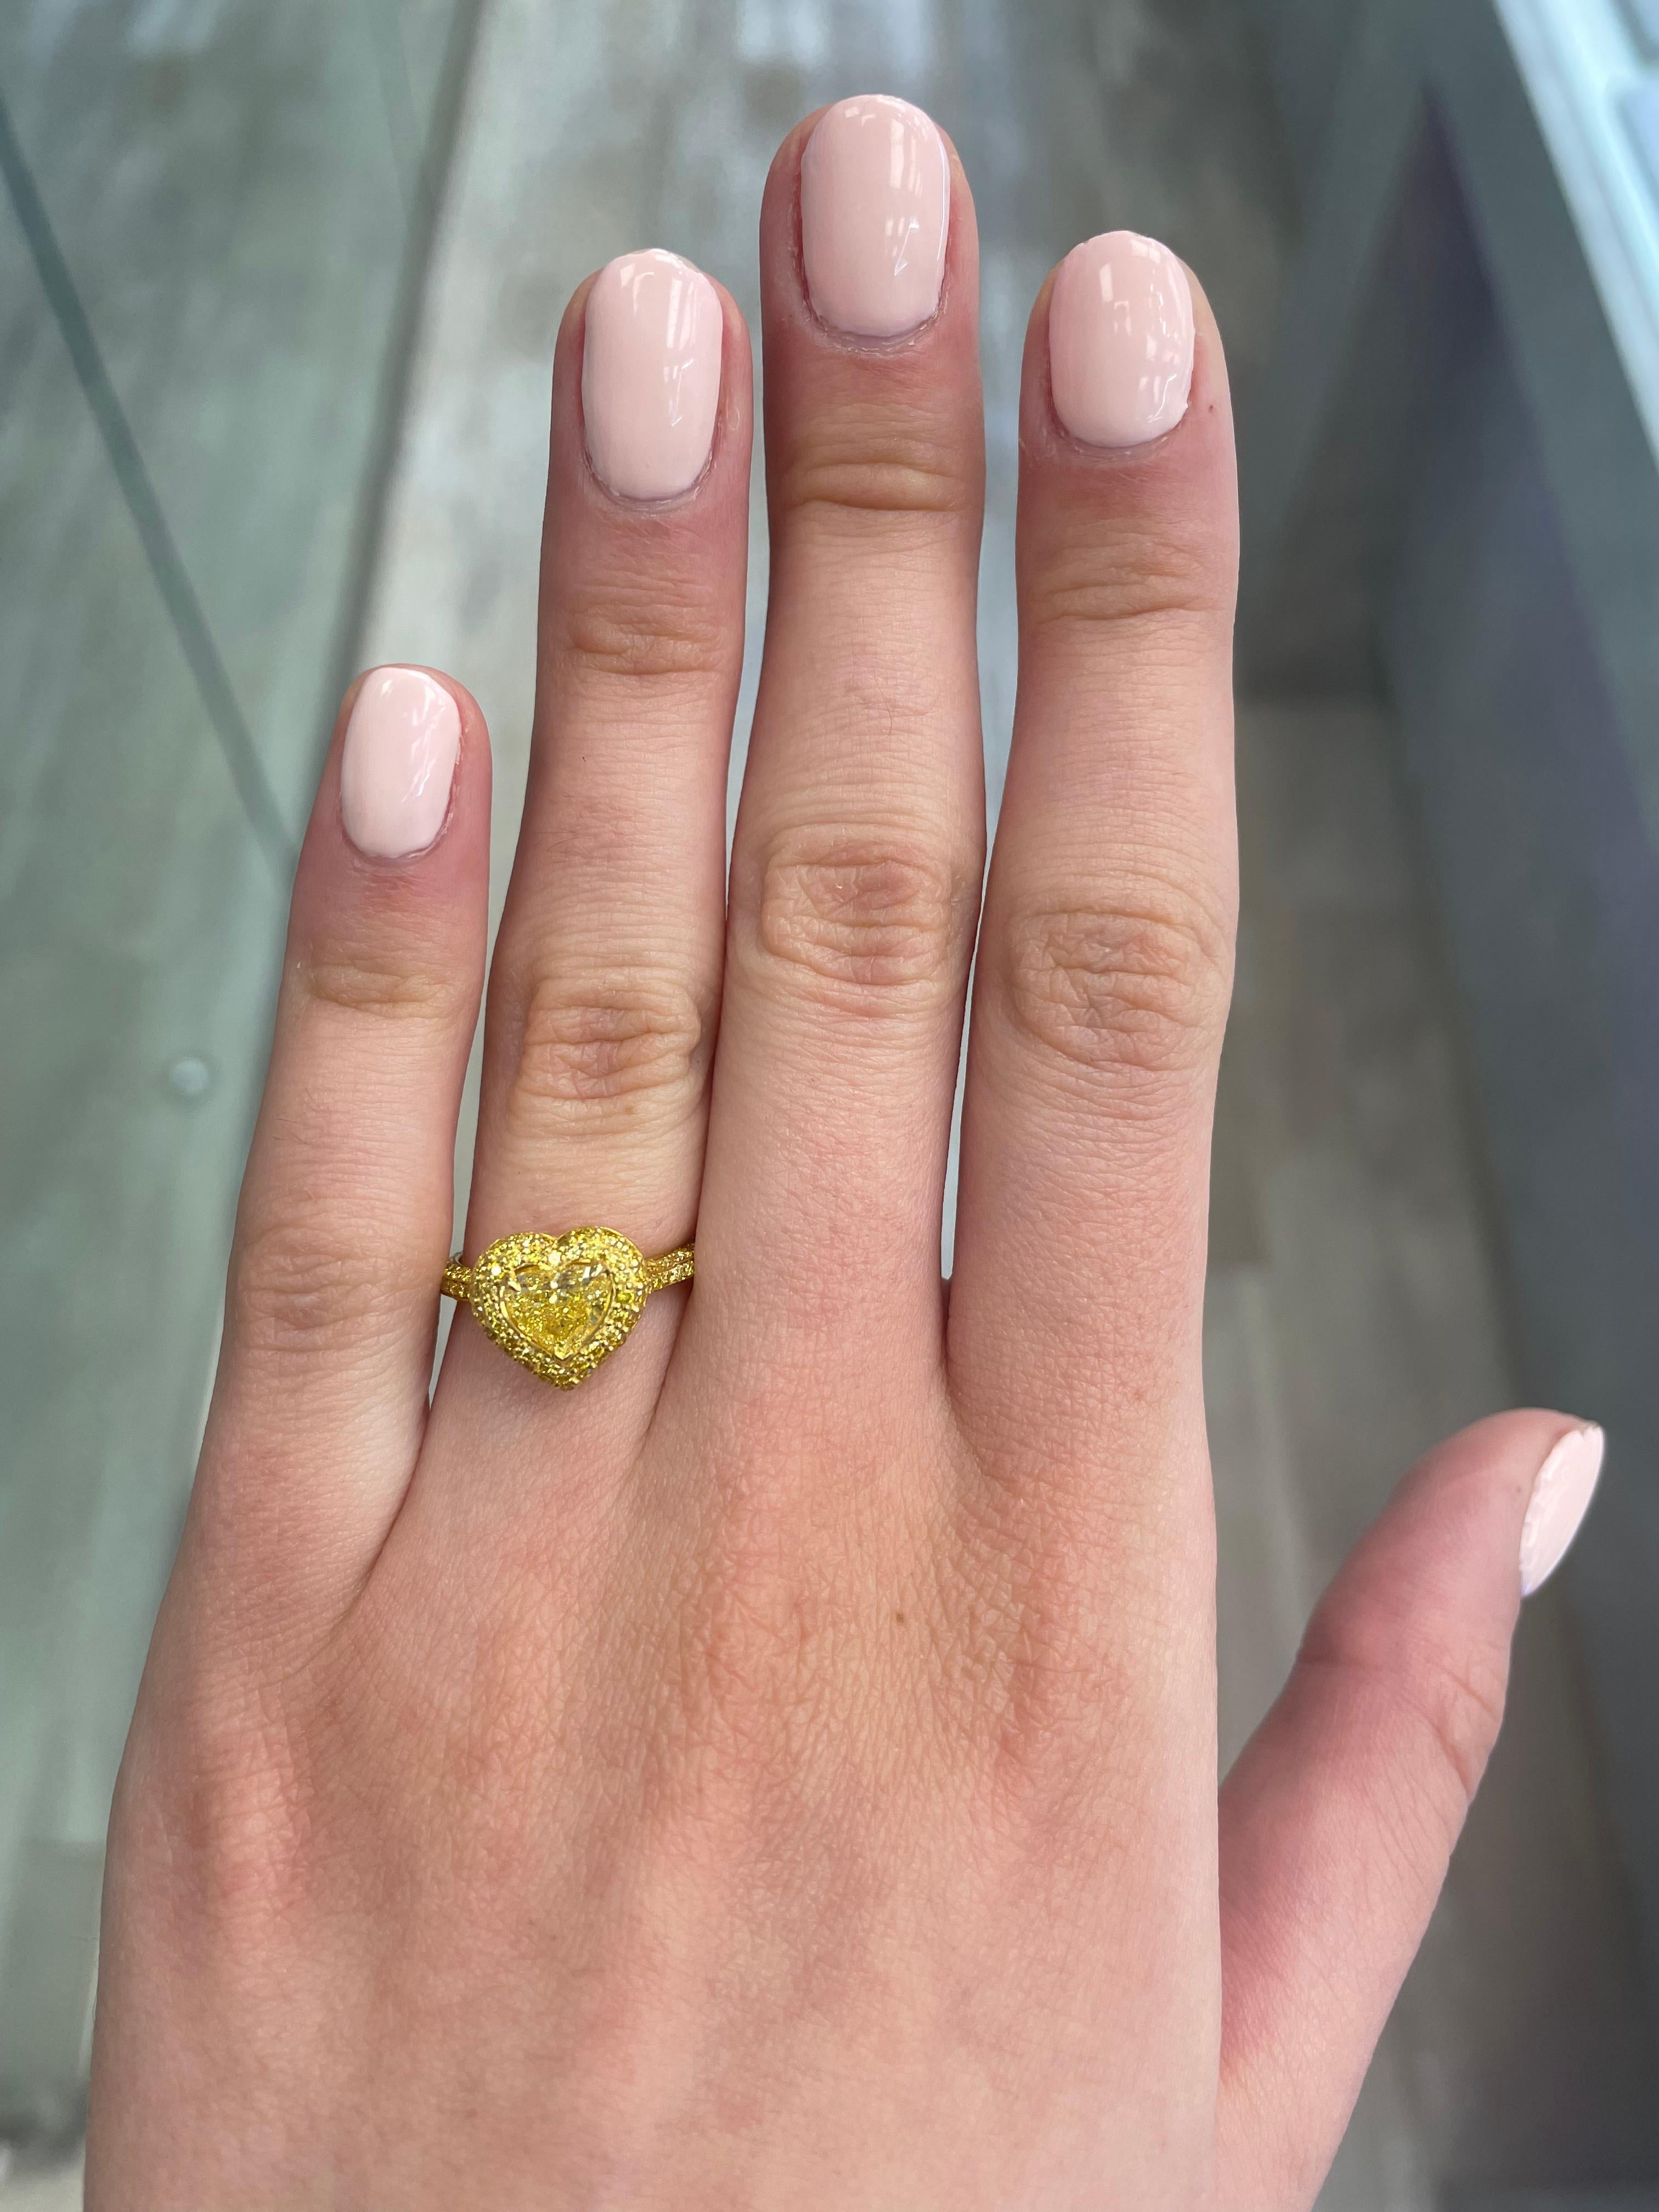 Stunning modern GIA certified yellow diamond with halo ring, two-tone 18k yellow and white gold. High jewelry by Alexander Beverly Hills
1.92 carats total diamond weight.
0.90 carat heart cut Fancy Intense Yellow color and SI2 clarity grade, GIA